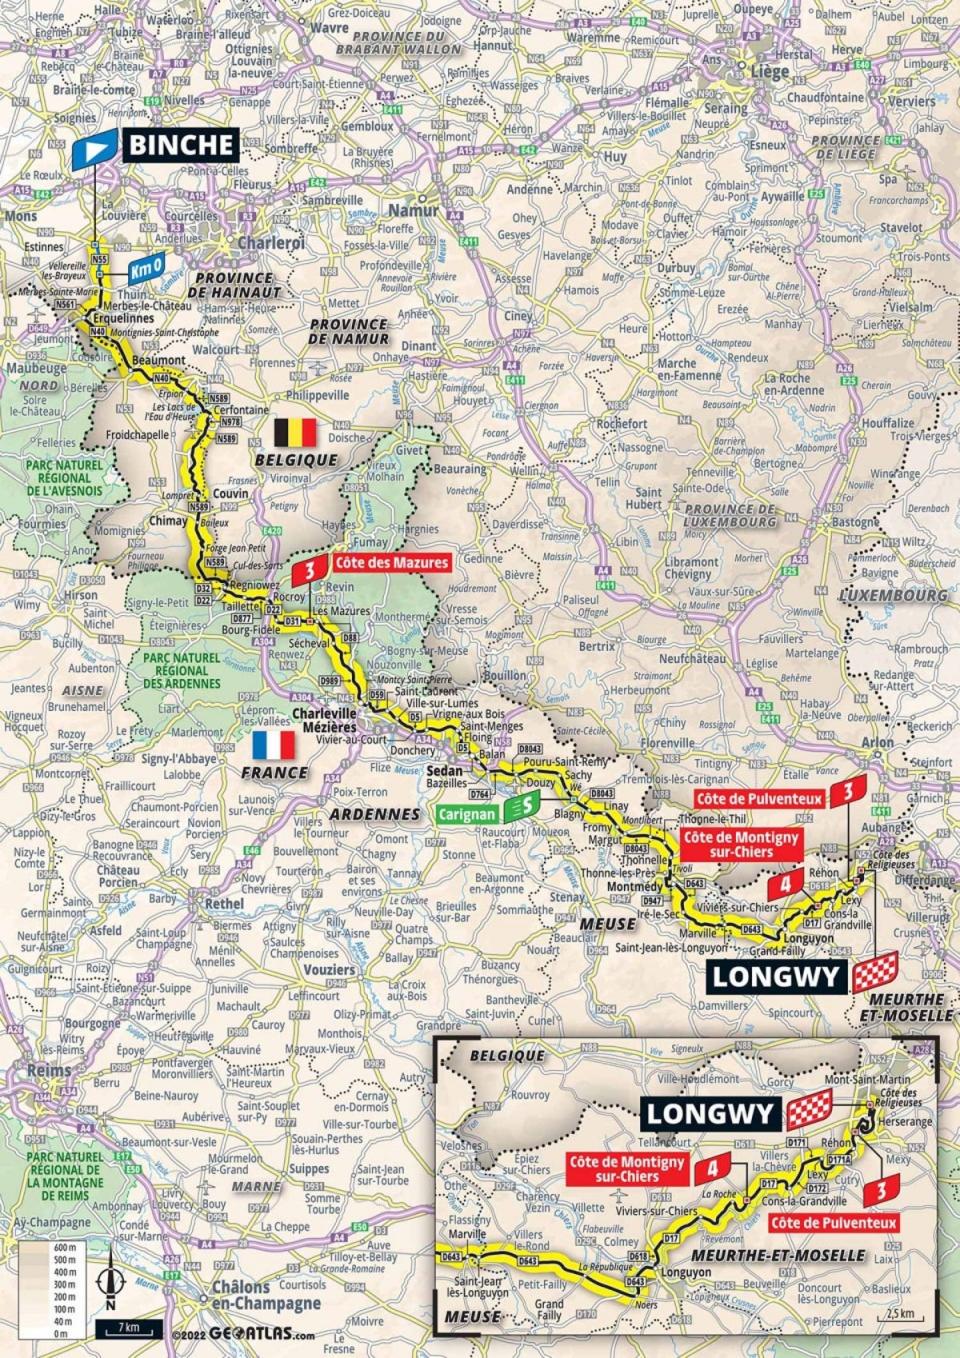 Stage 6 map (letour)